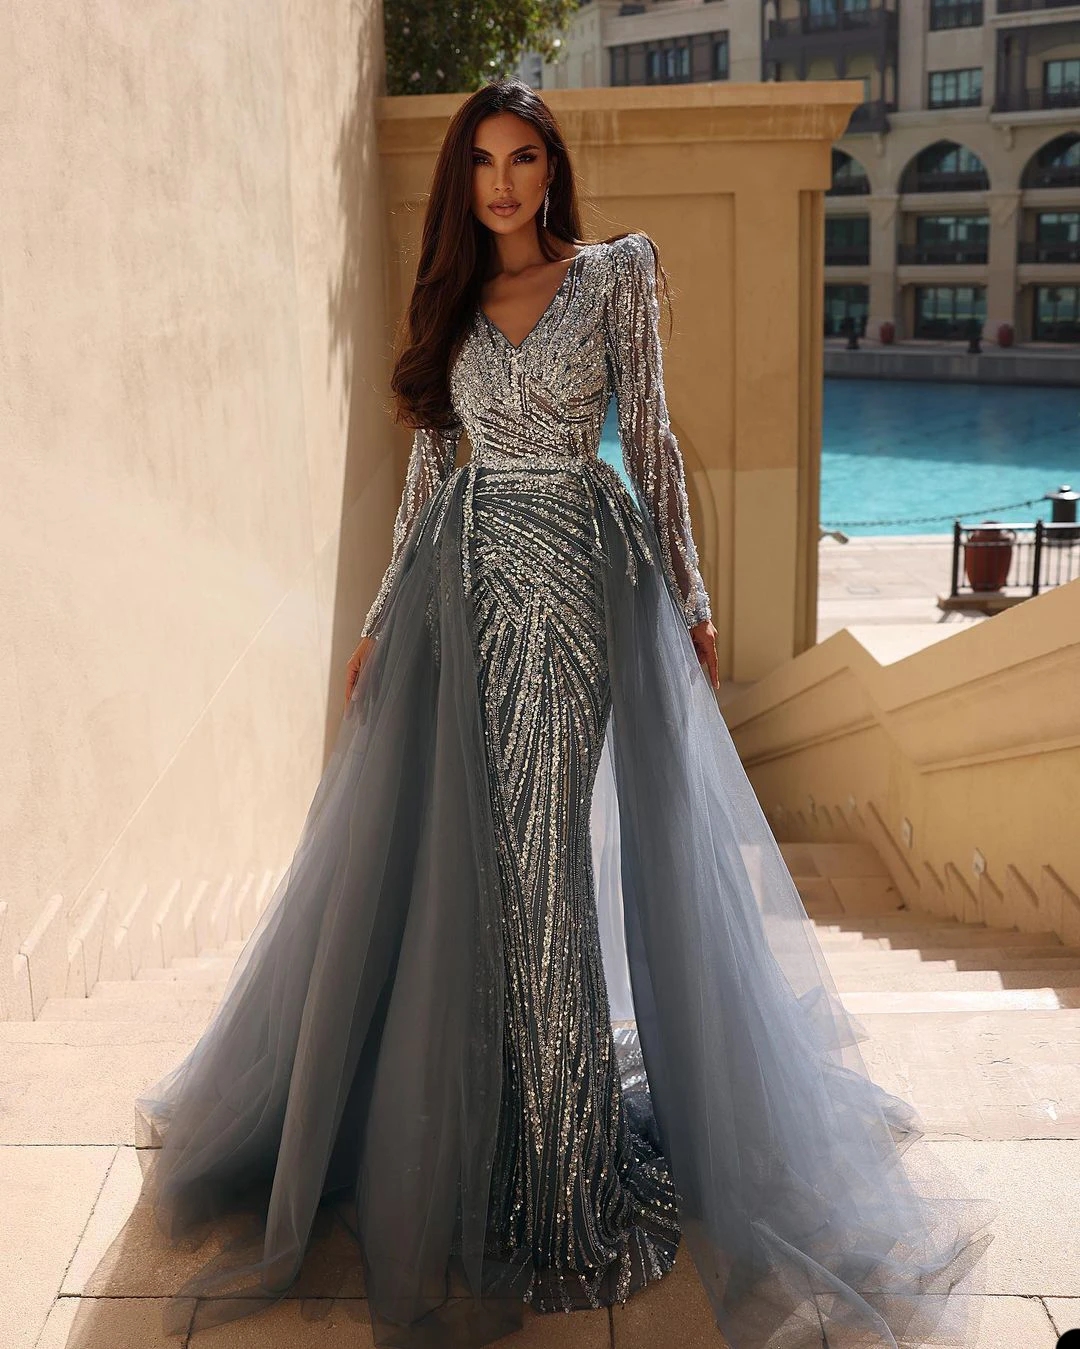 Luxurious Sequined African Dubai Evening Dresses V Neck Full Sleeve Mermaid Prom Dress Tulle Detachable Train Formal Party Gowns